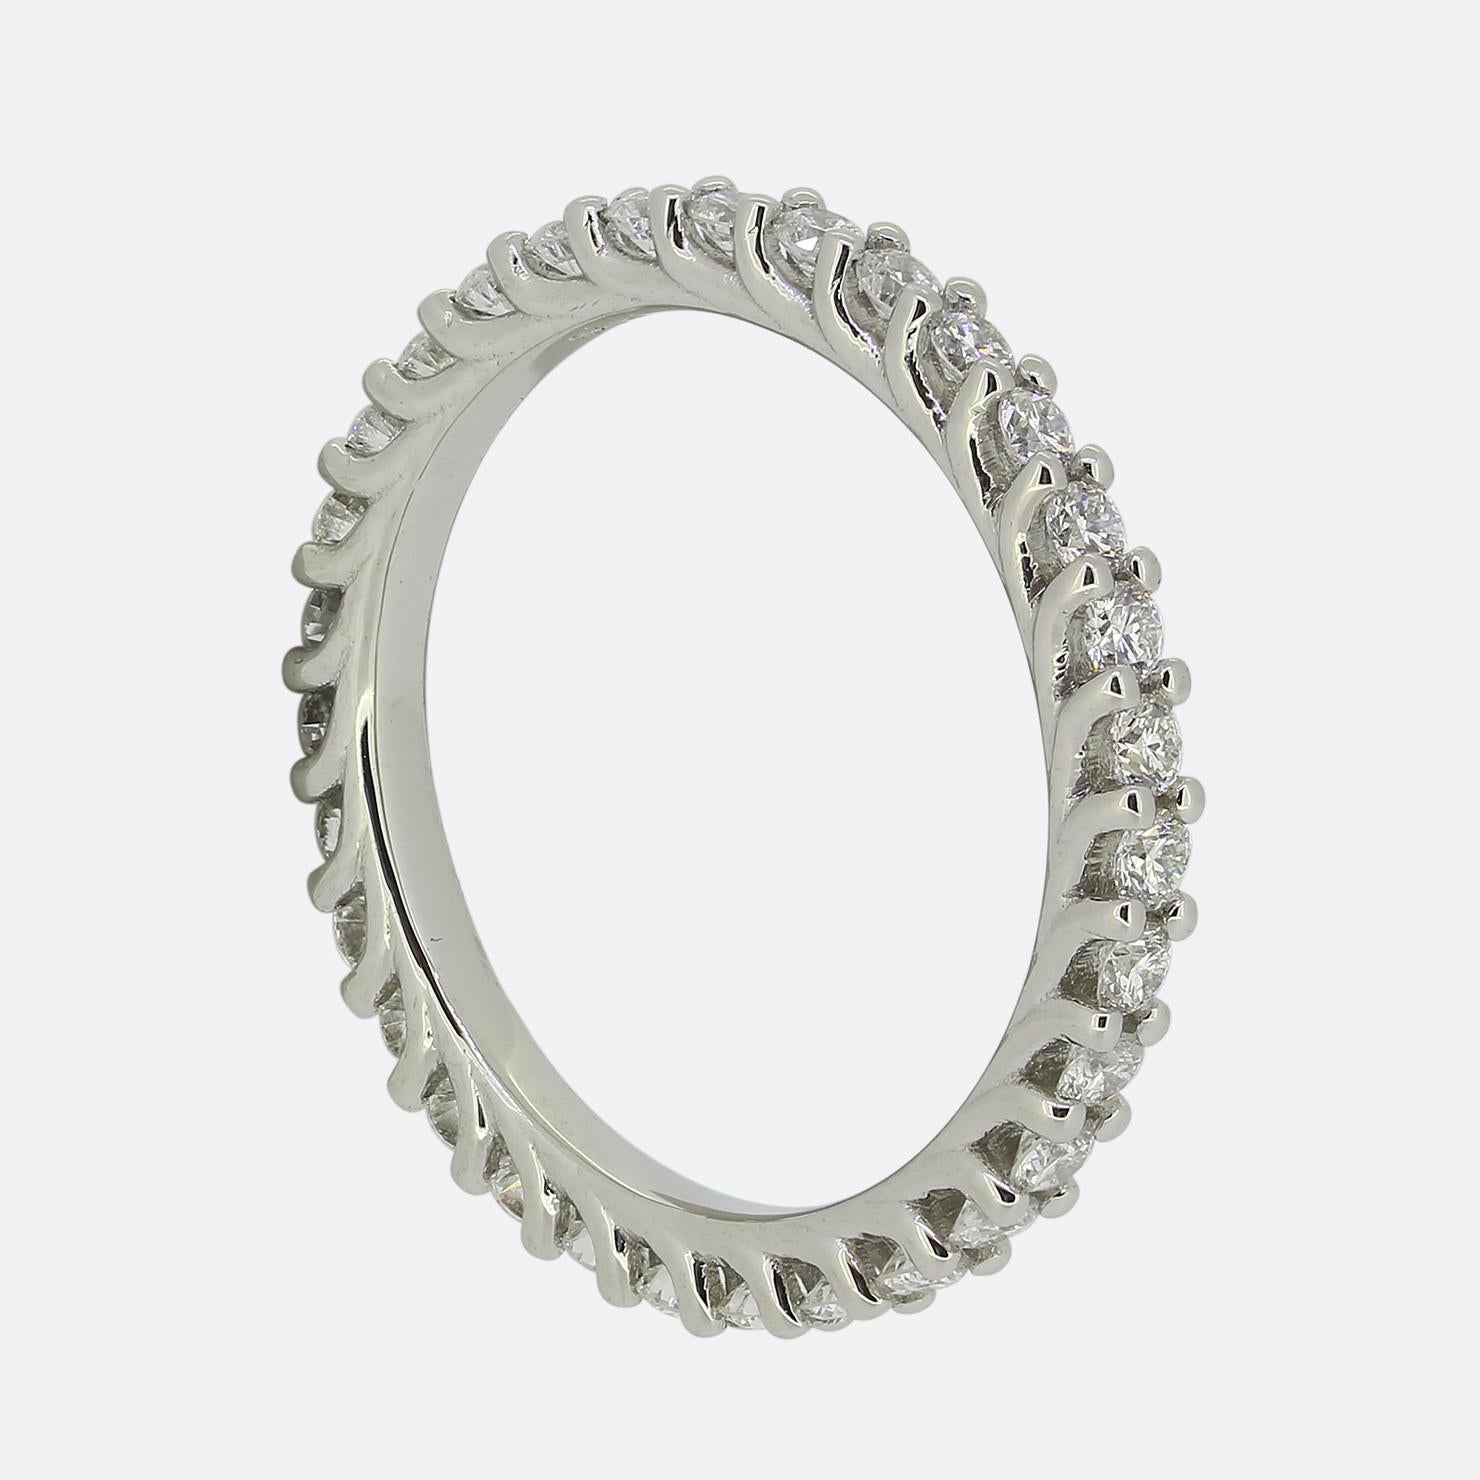 Here we have an classically designed, contemporary platinum diamond full eternity ring. The entire band has been set with 30 individually claw set round brilliant cuts diamonds around the outer edge in a single line formation with the under-gallery